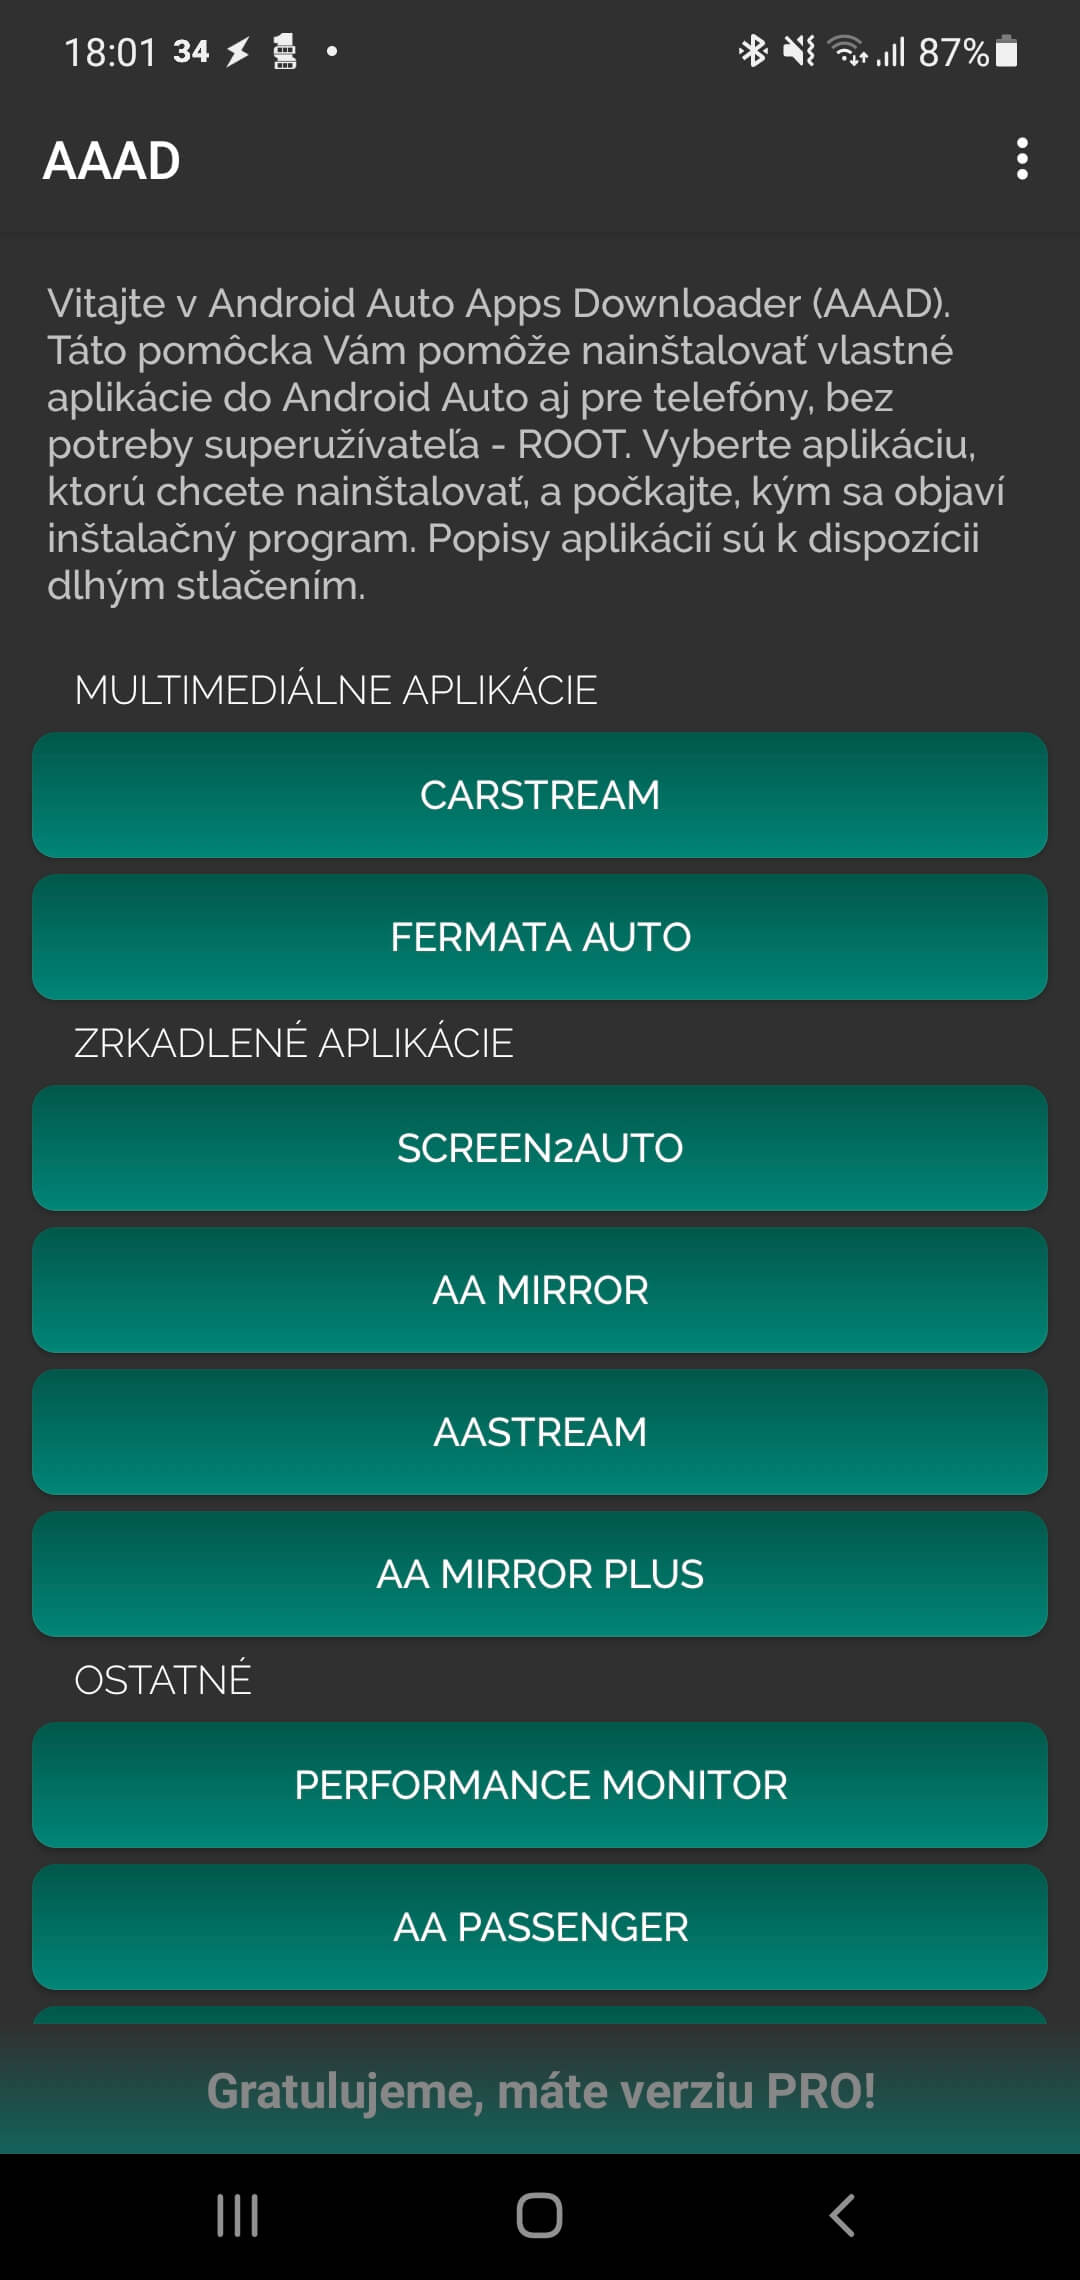 Android Auto Apps Downloader